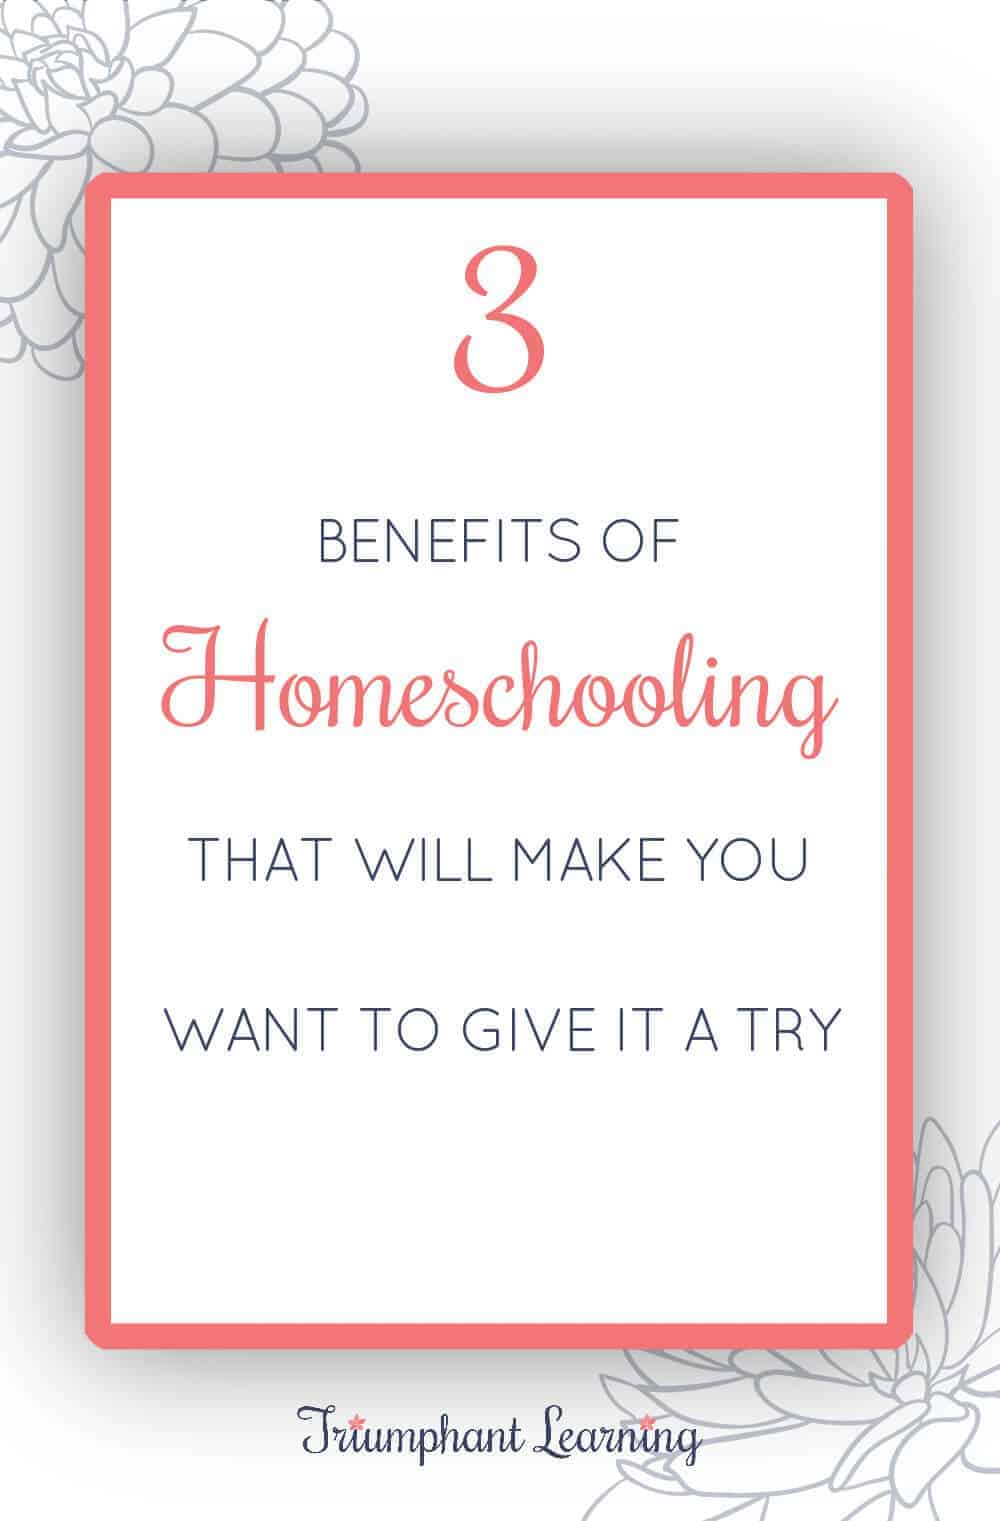 There are many benefits of homeschooling. Learn about three of those benefits and how you can decide if you should homeschool. via @TriLearning